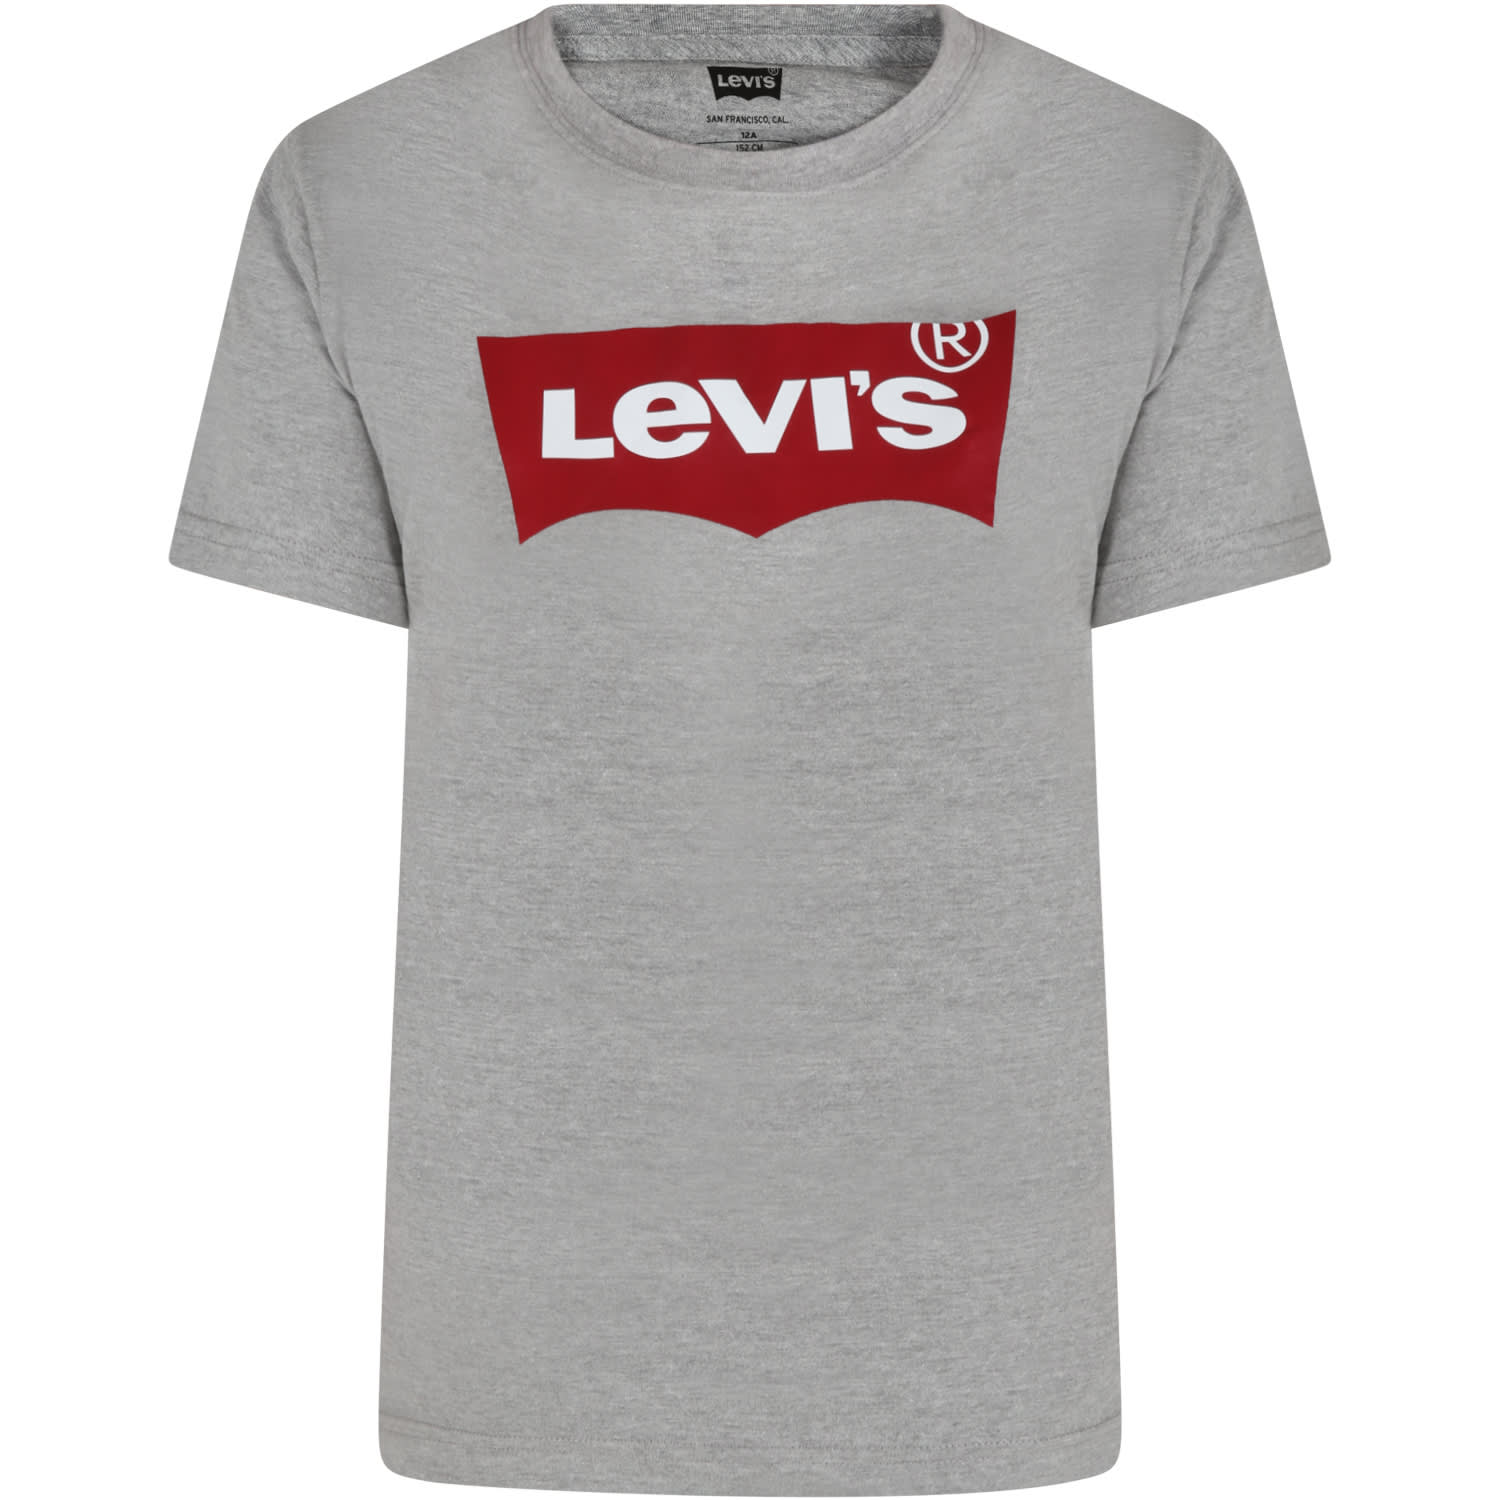 Levi's Grey T-shirt For Kids With Logo